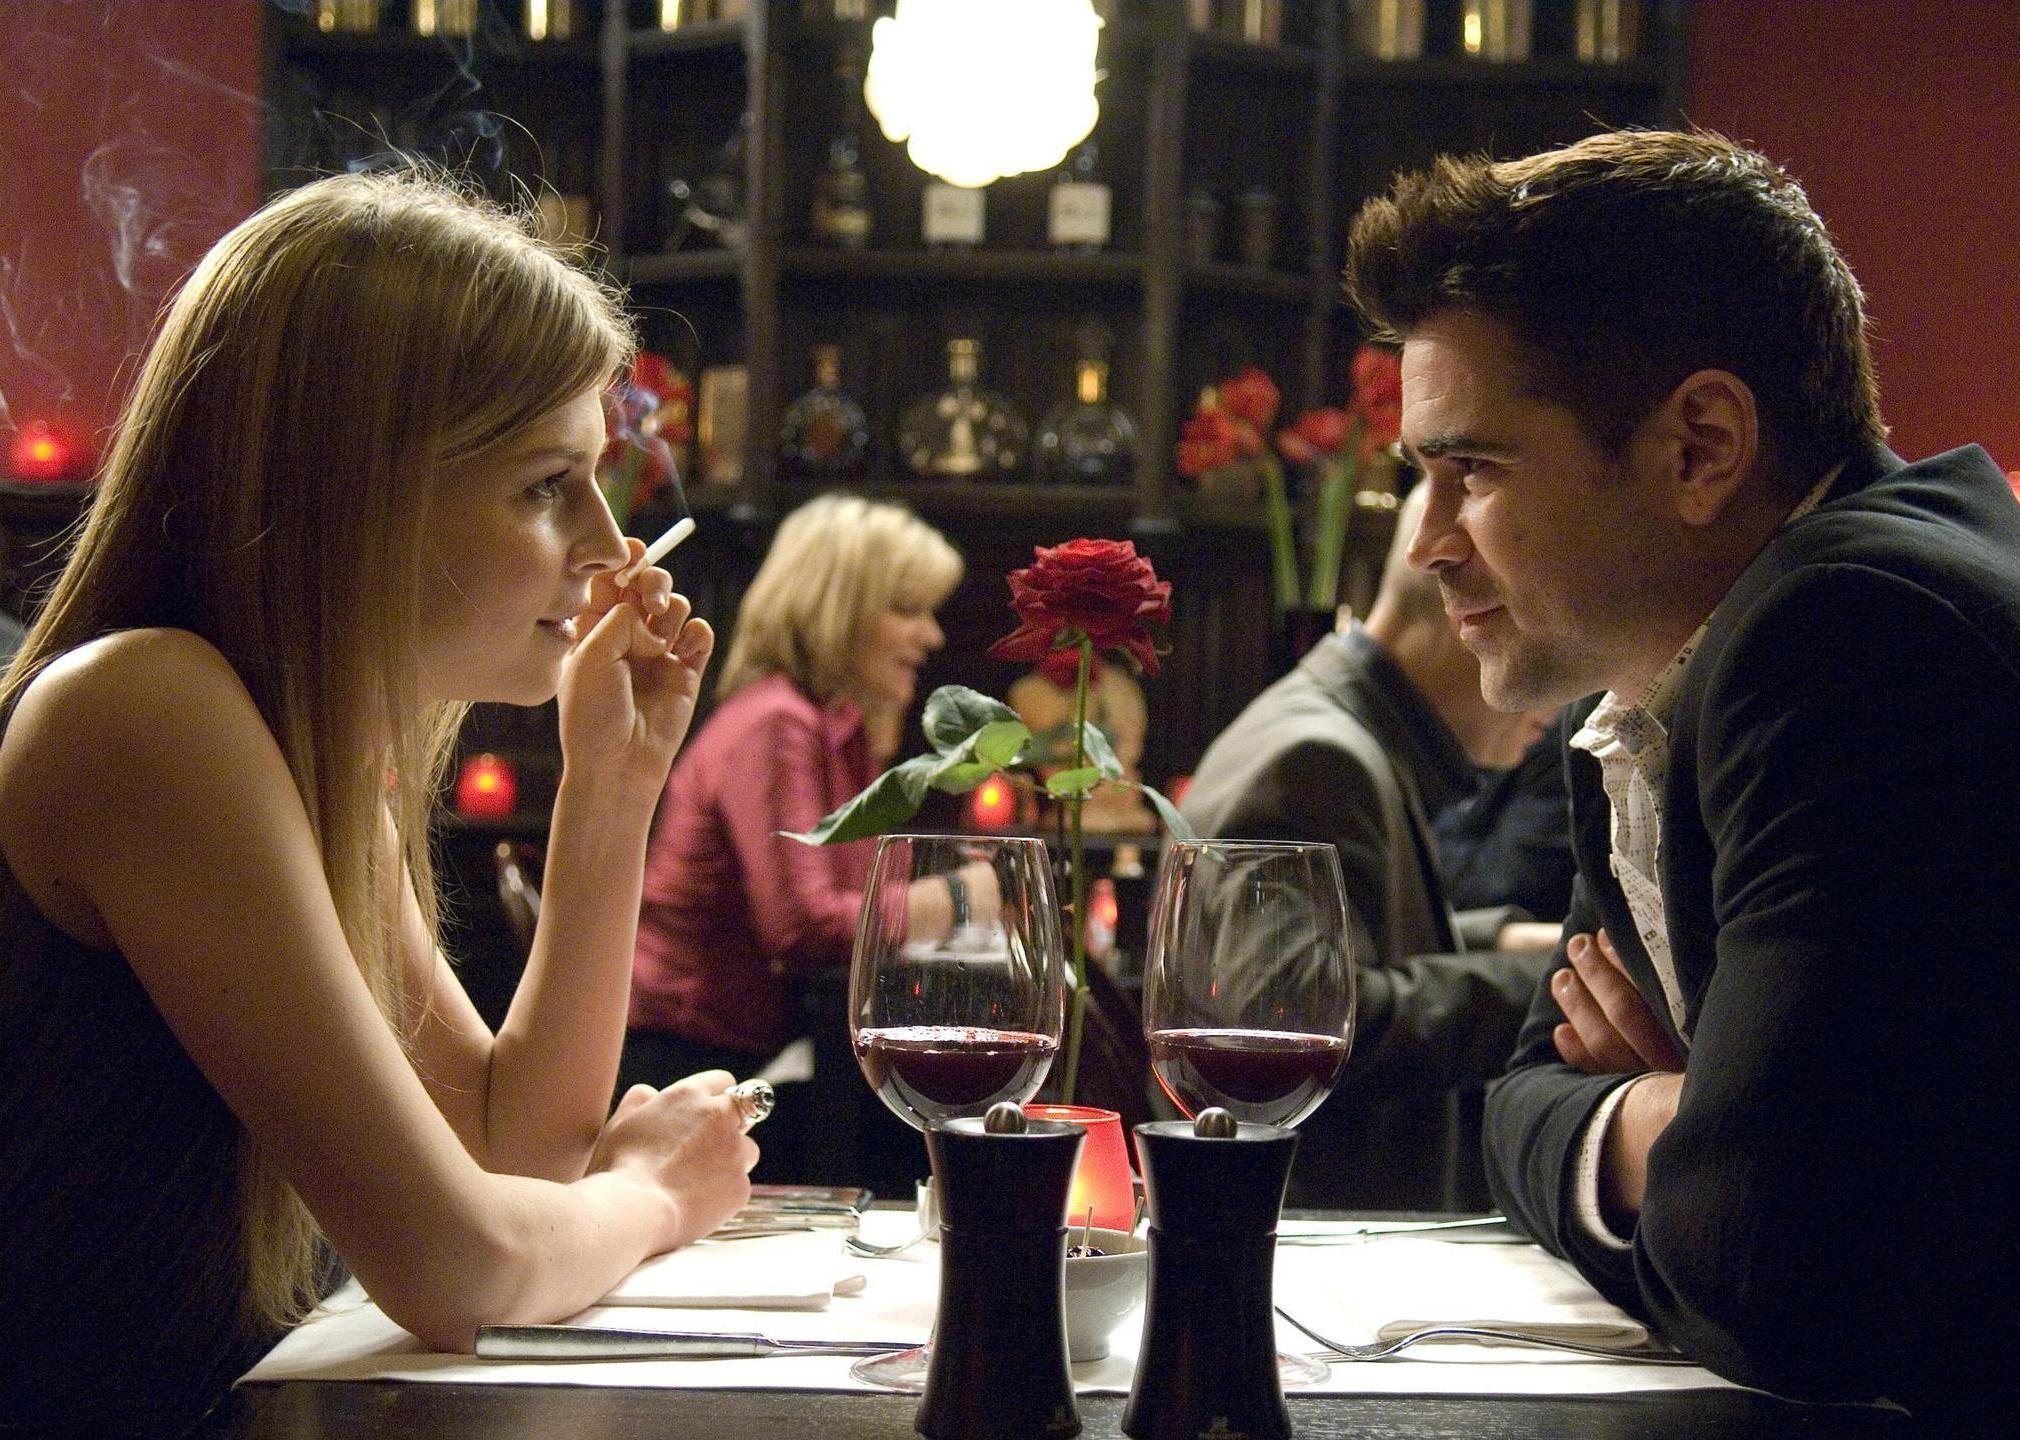 Colin Farrell sitting at a restaurant table with a woman smoking a cigarette.